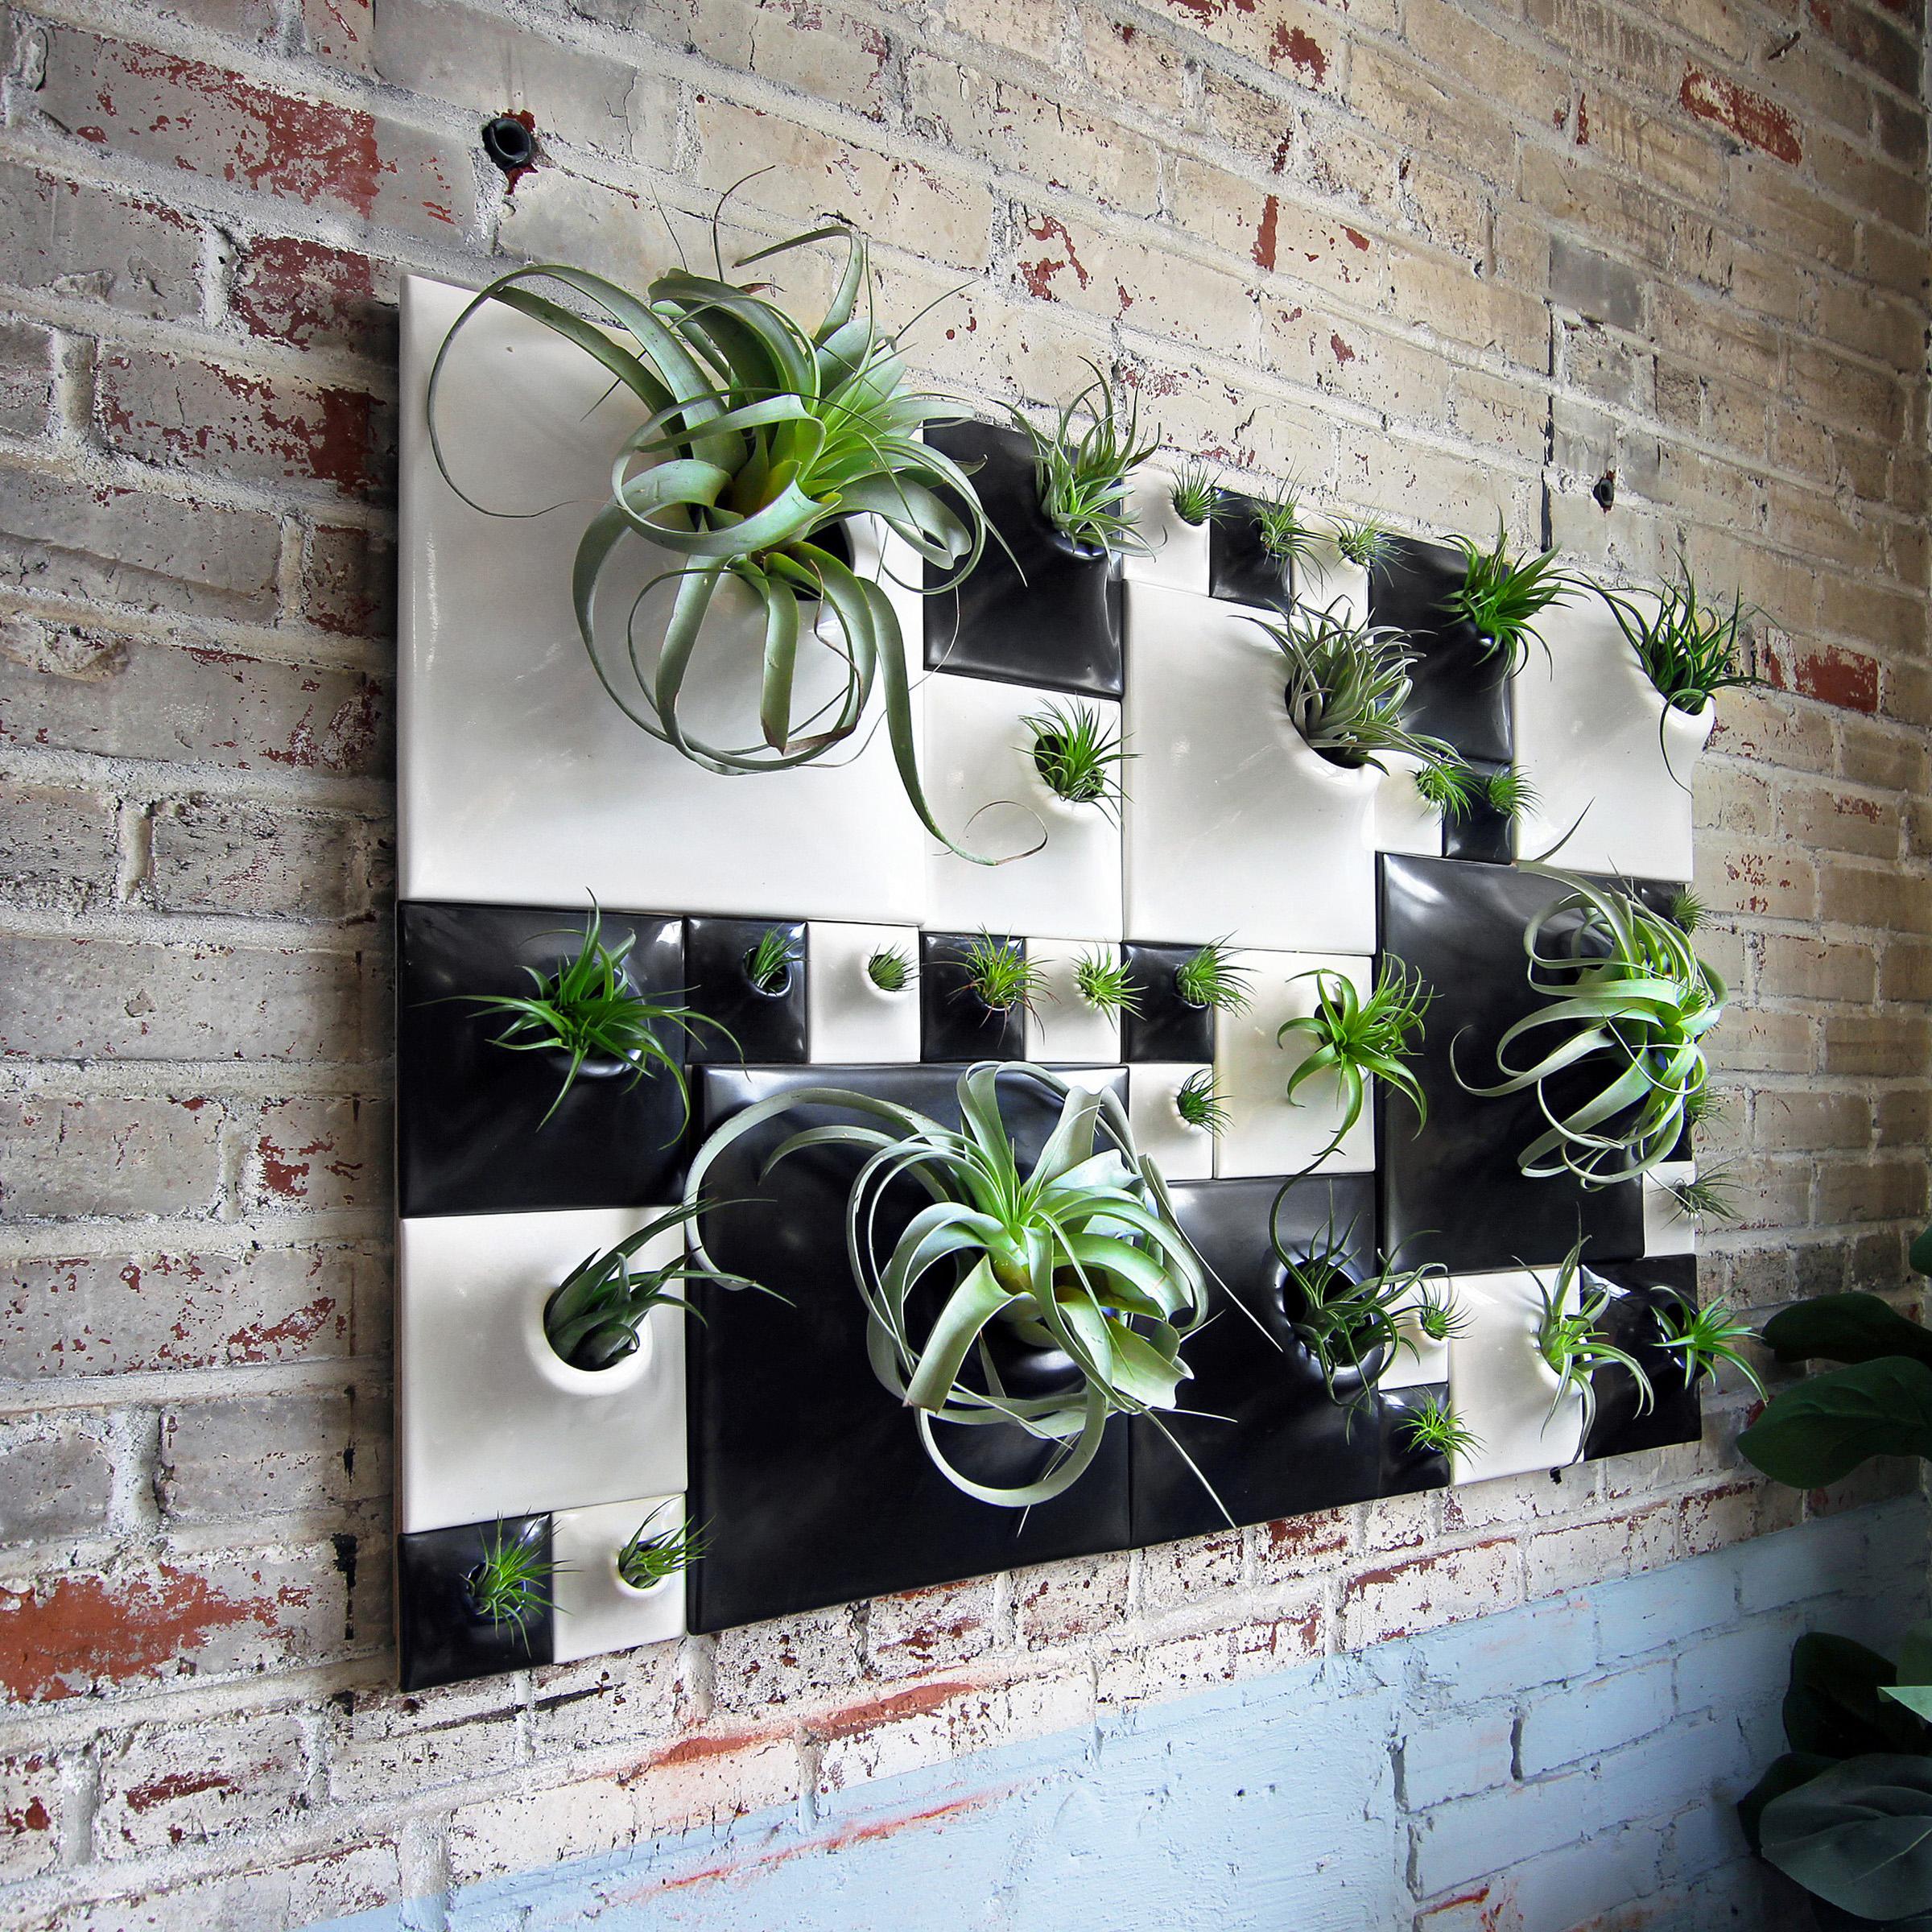 Introducing the next level of living wall!  Create your own undulating sculptural greenwall in your home, restaurant, or office.  Dazzle your senses with this dynamic experiential living wall decor and add some excitement and modern design to any